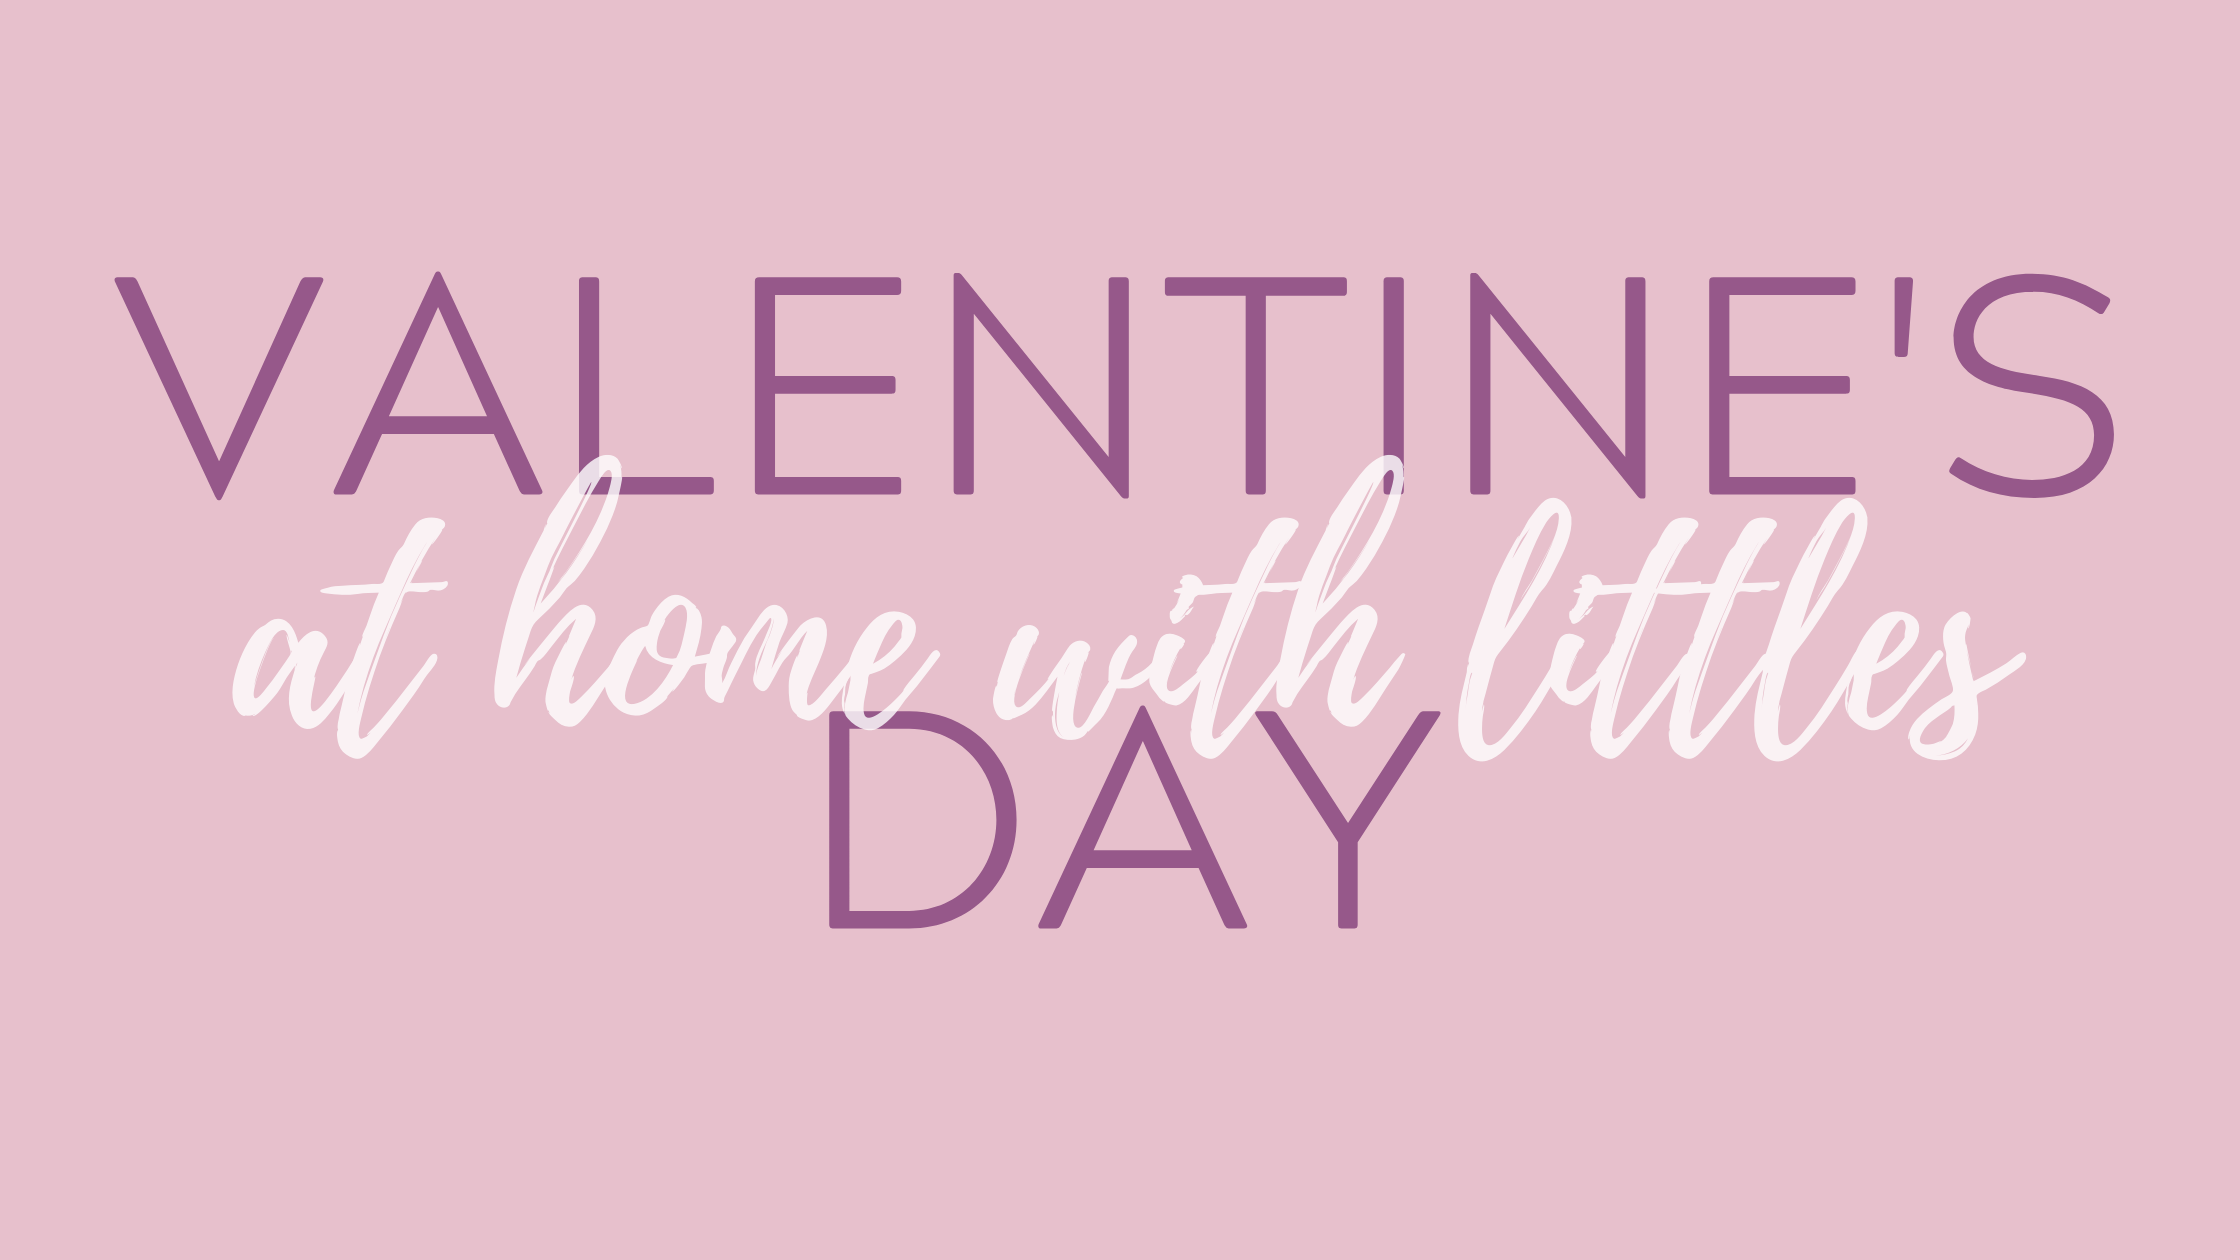 Valentine's Day at home with littles